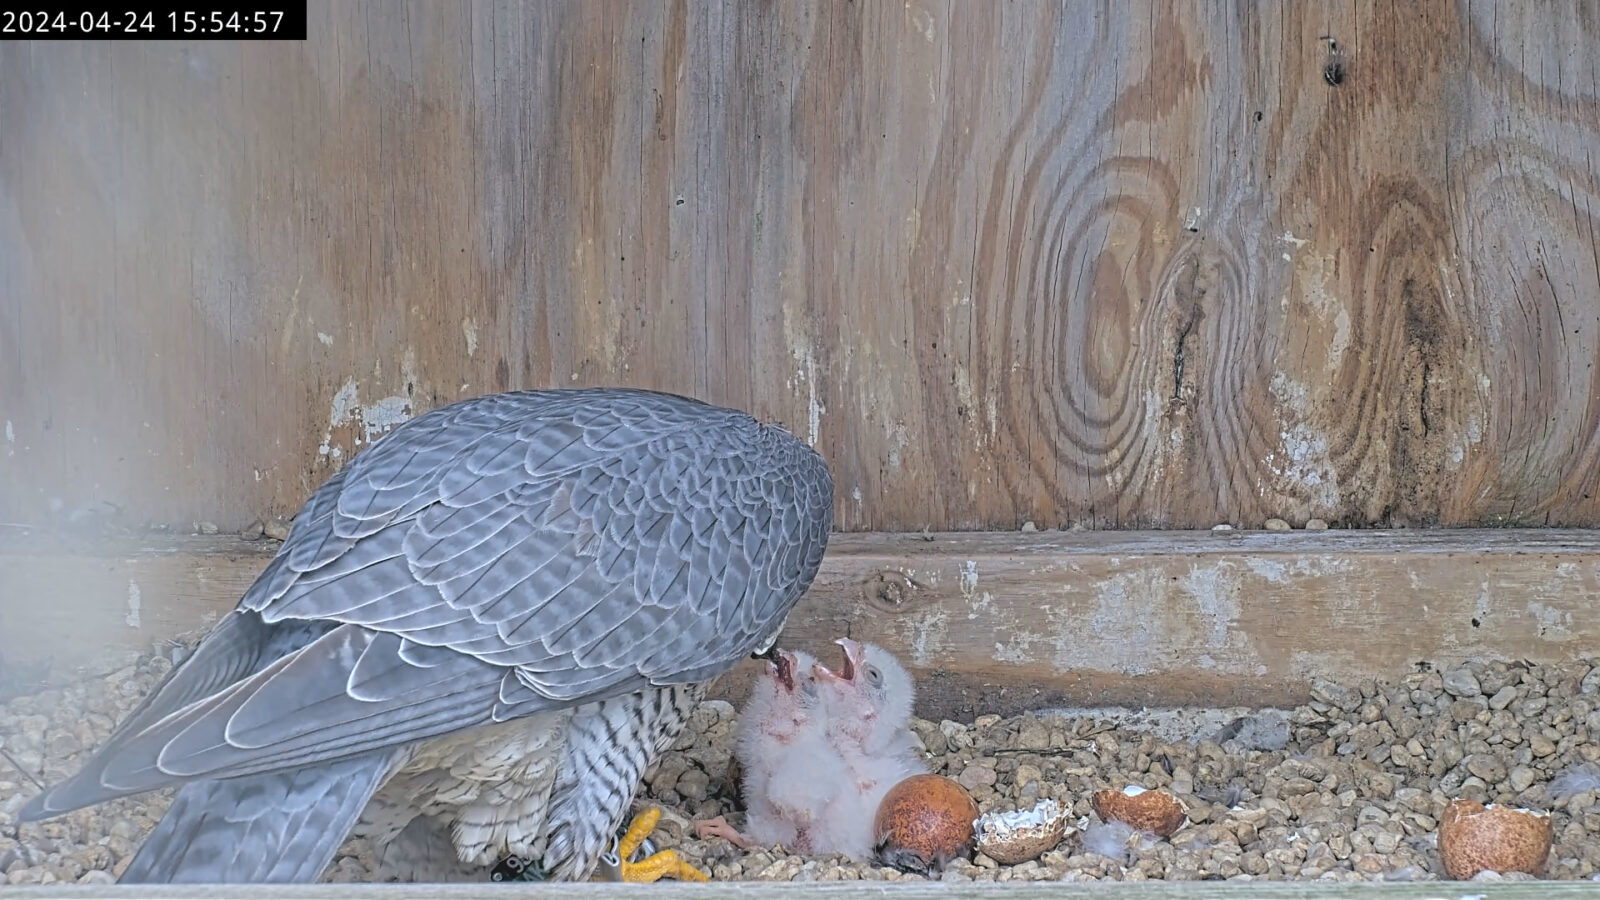 The mother peregrine falcon feeding her two chicks following their hatching